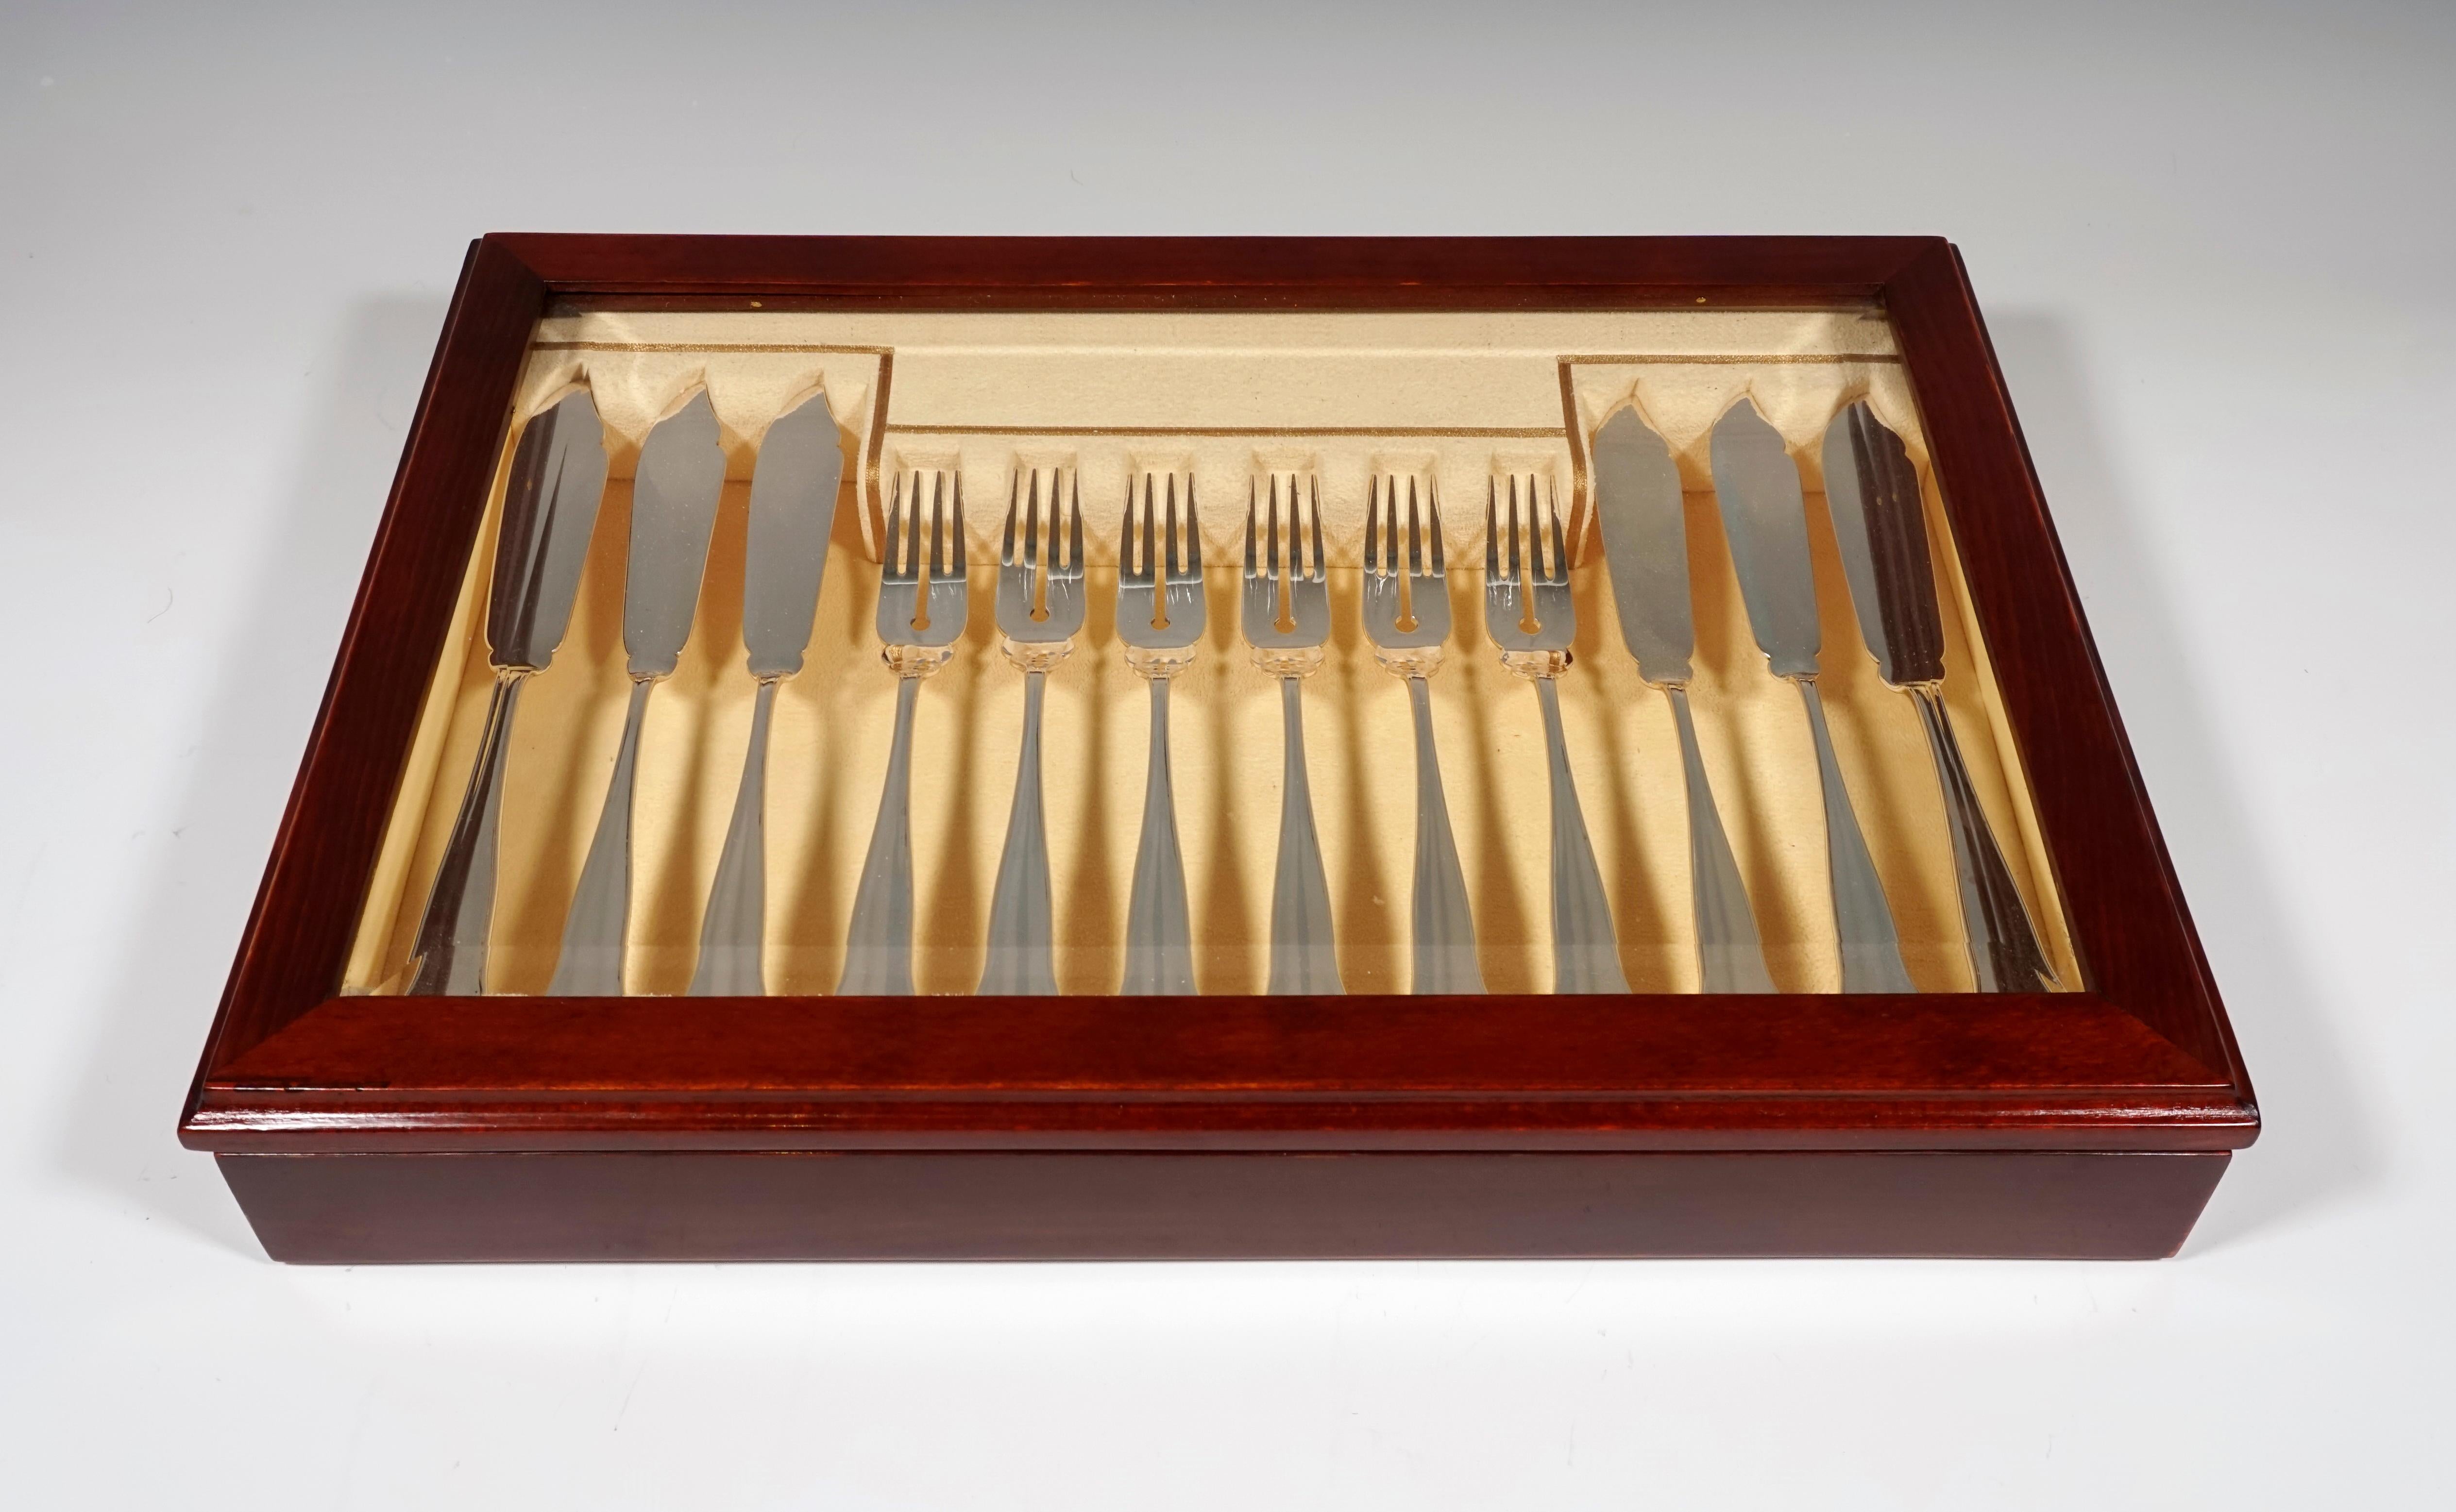 Elegant fish cutlery set made of solid silver for six people, consisting of 12 parts, in a showcase.
Date of manufactory: circa 1925
Material: Massive sterling silver '800'
Style: Discreet thread decoration around a slightly curved bridge with a